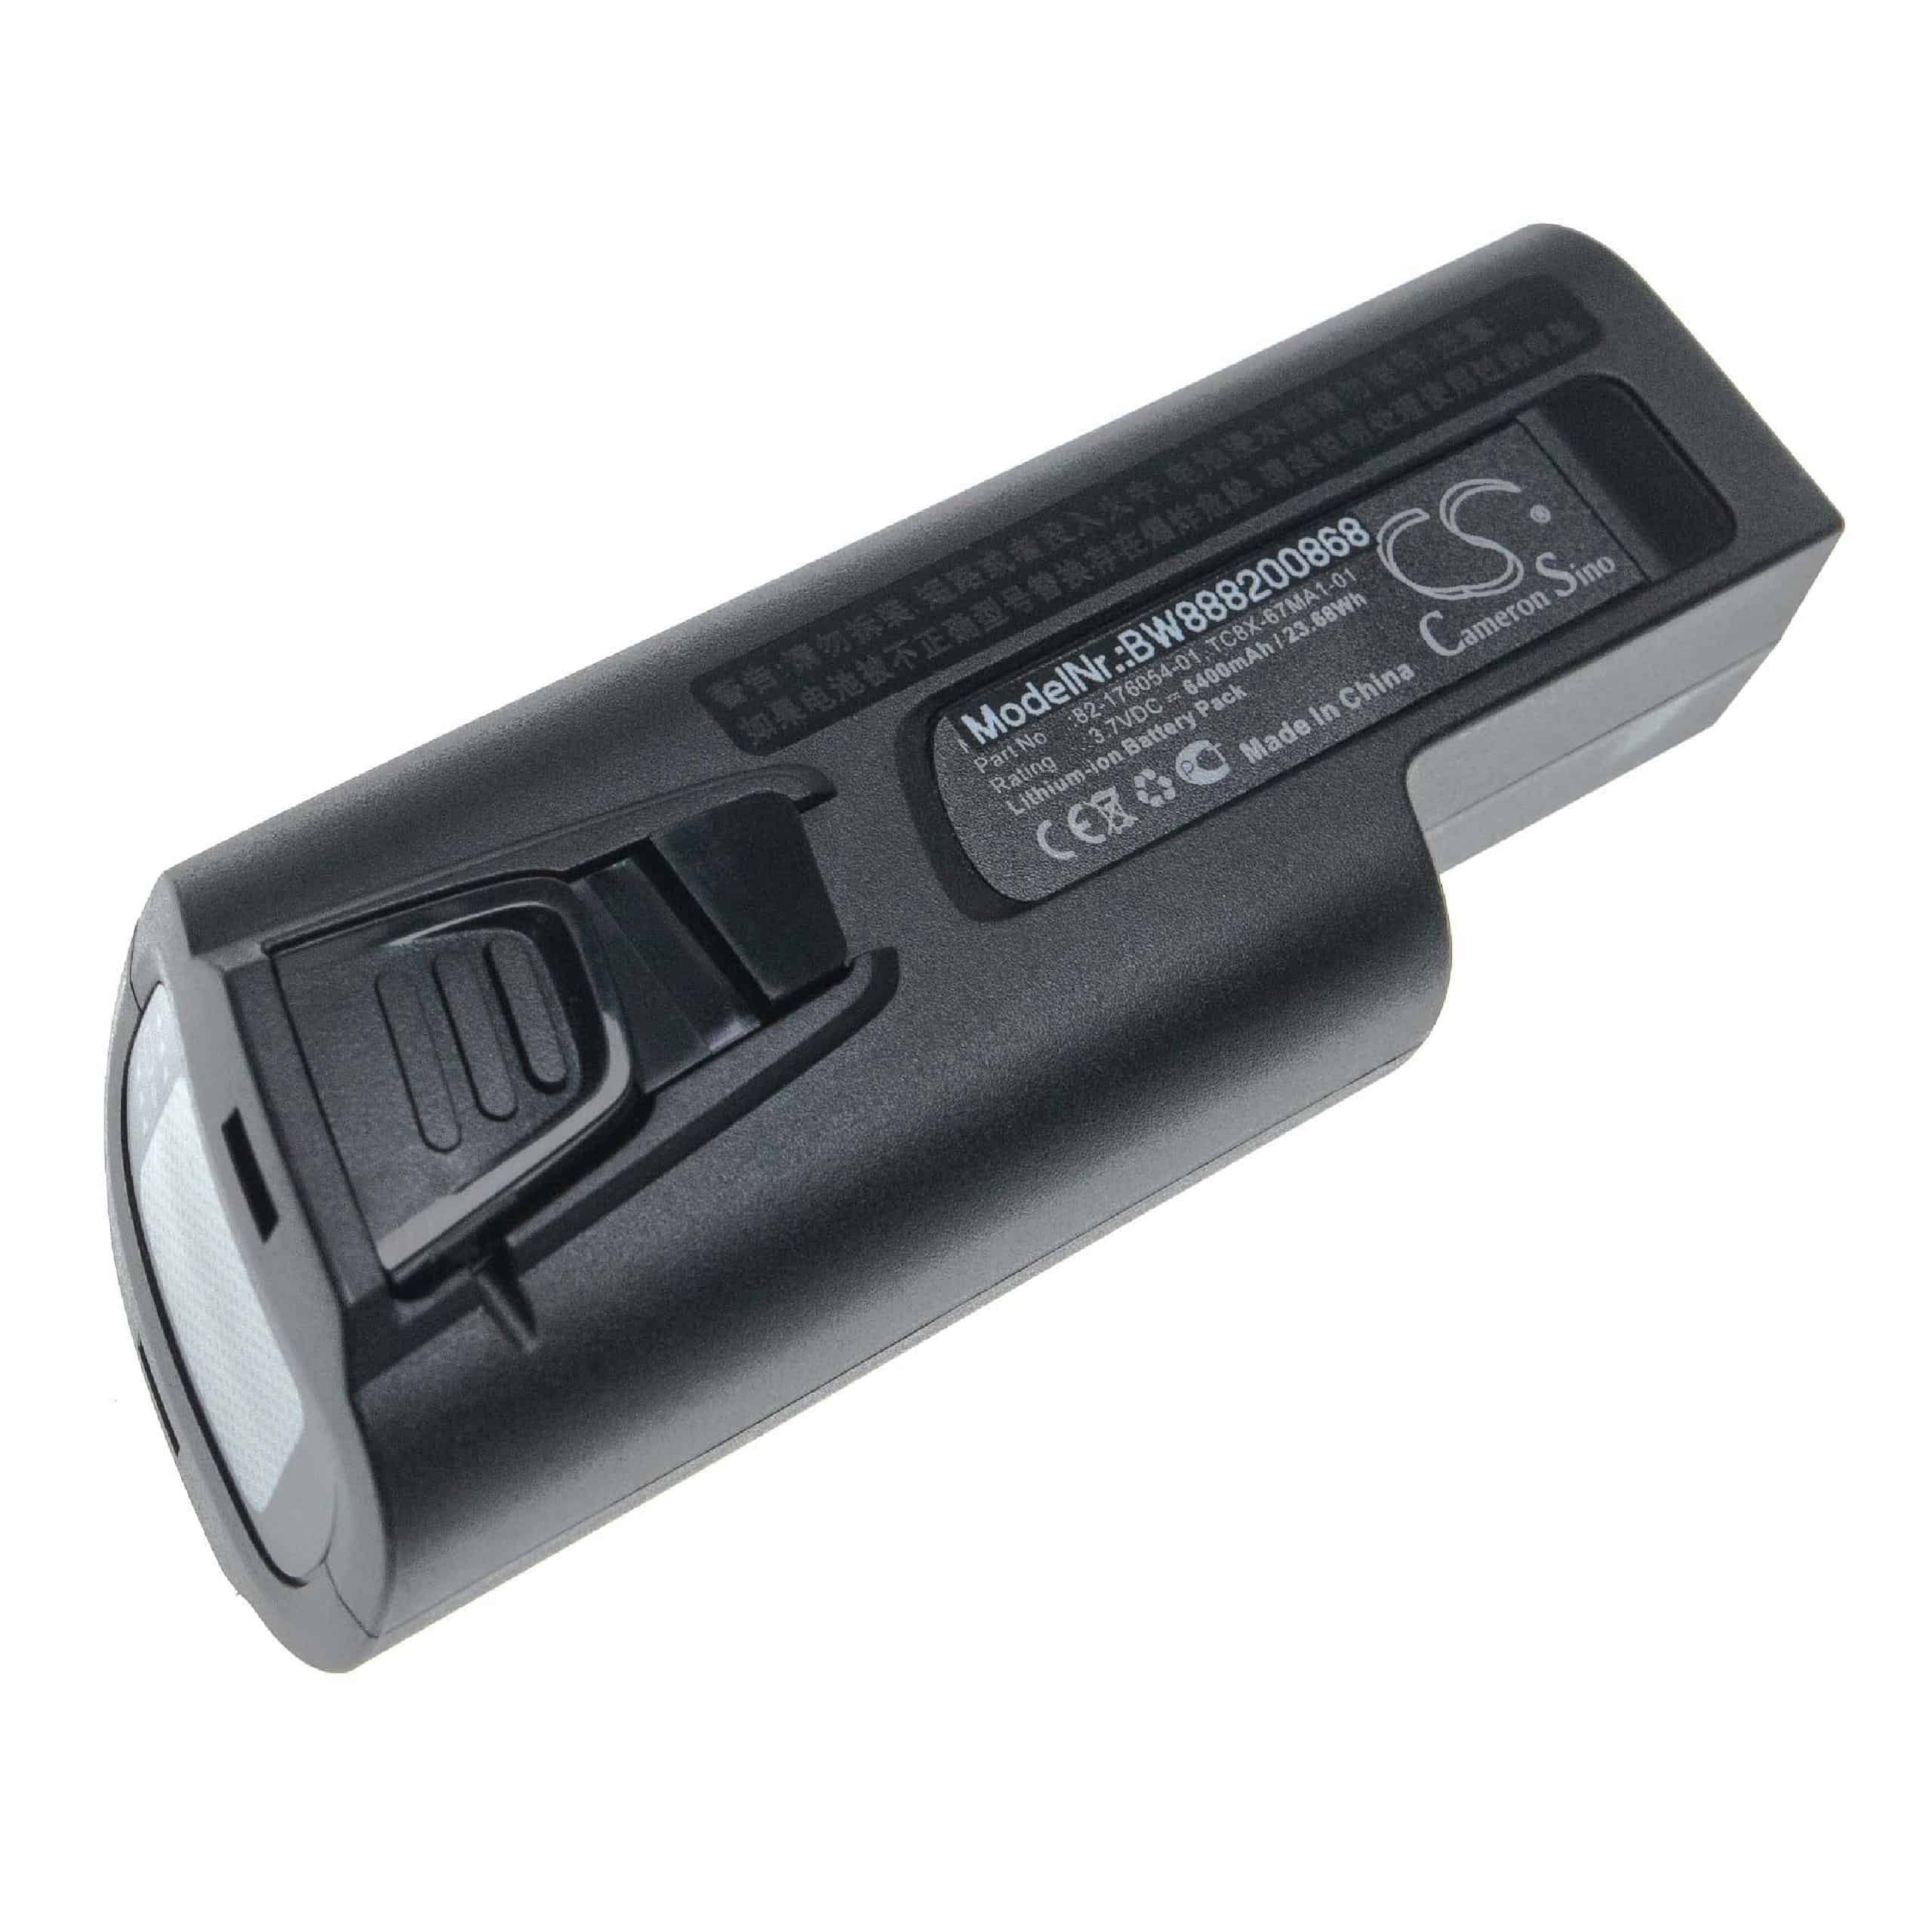 Barcode Scanner POS Battery Replacement for Zebra 82-176054-04, 82-176054-01 - 6400mAh 3.7V Li-Ion